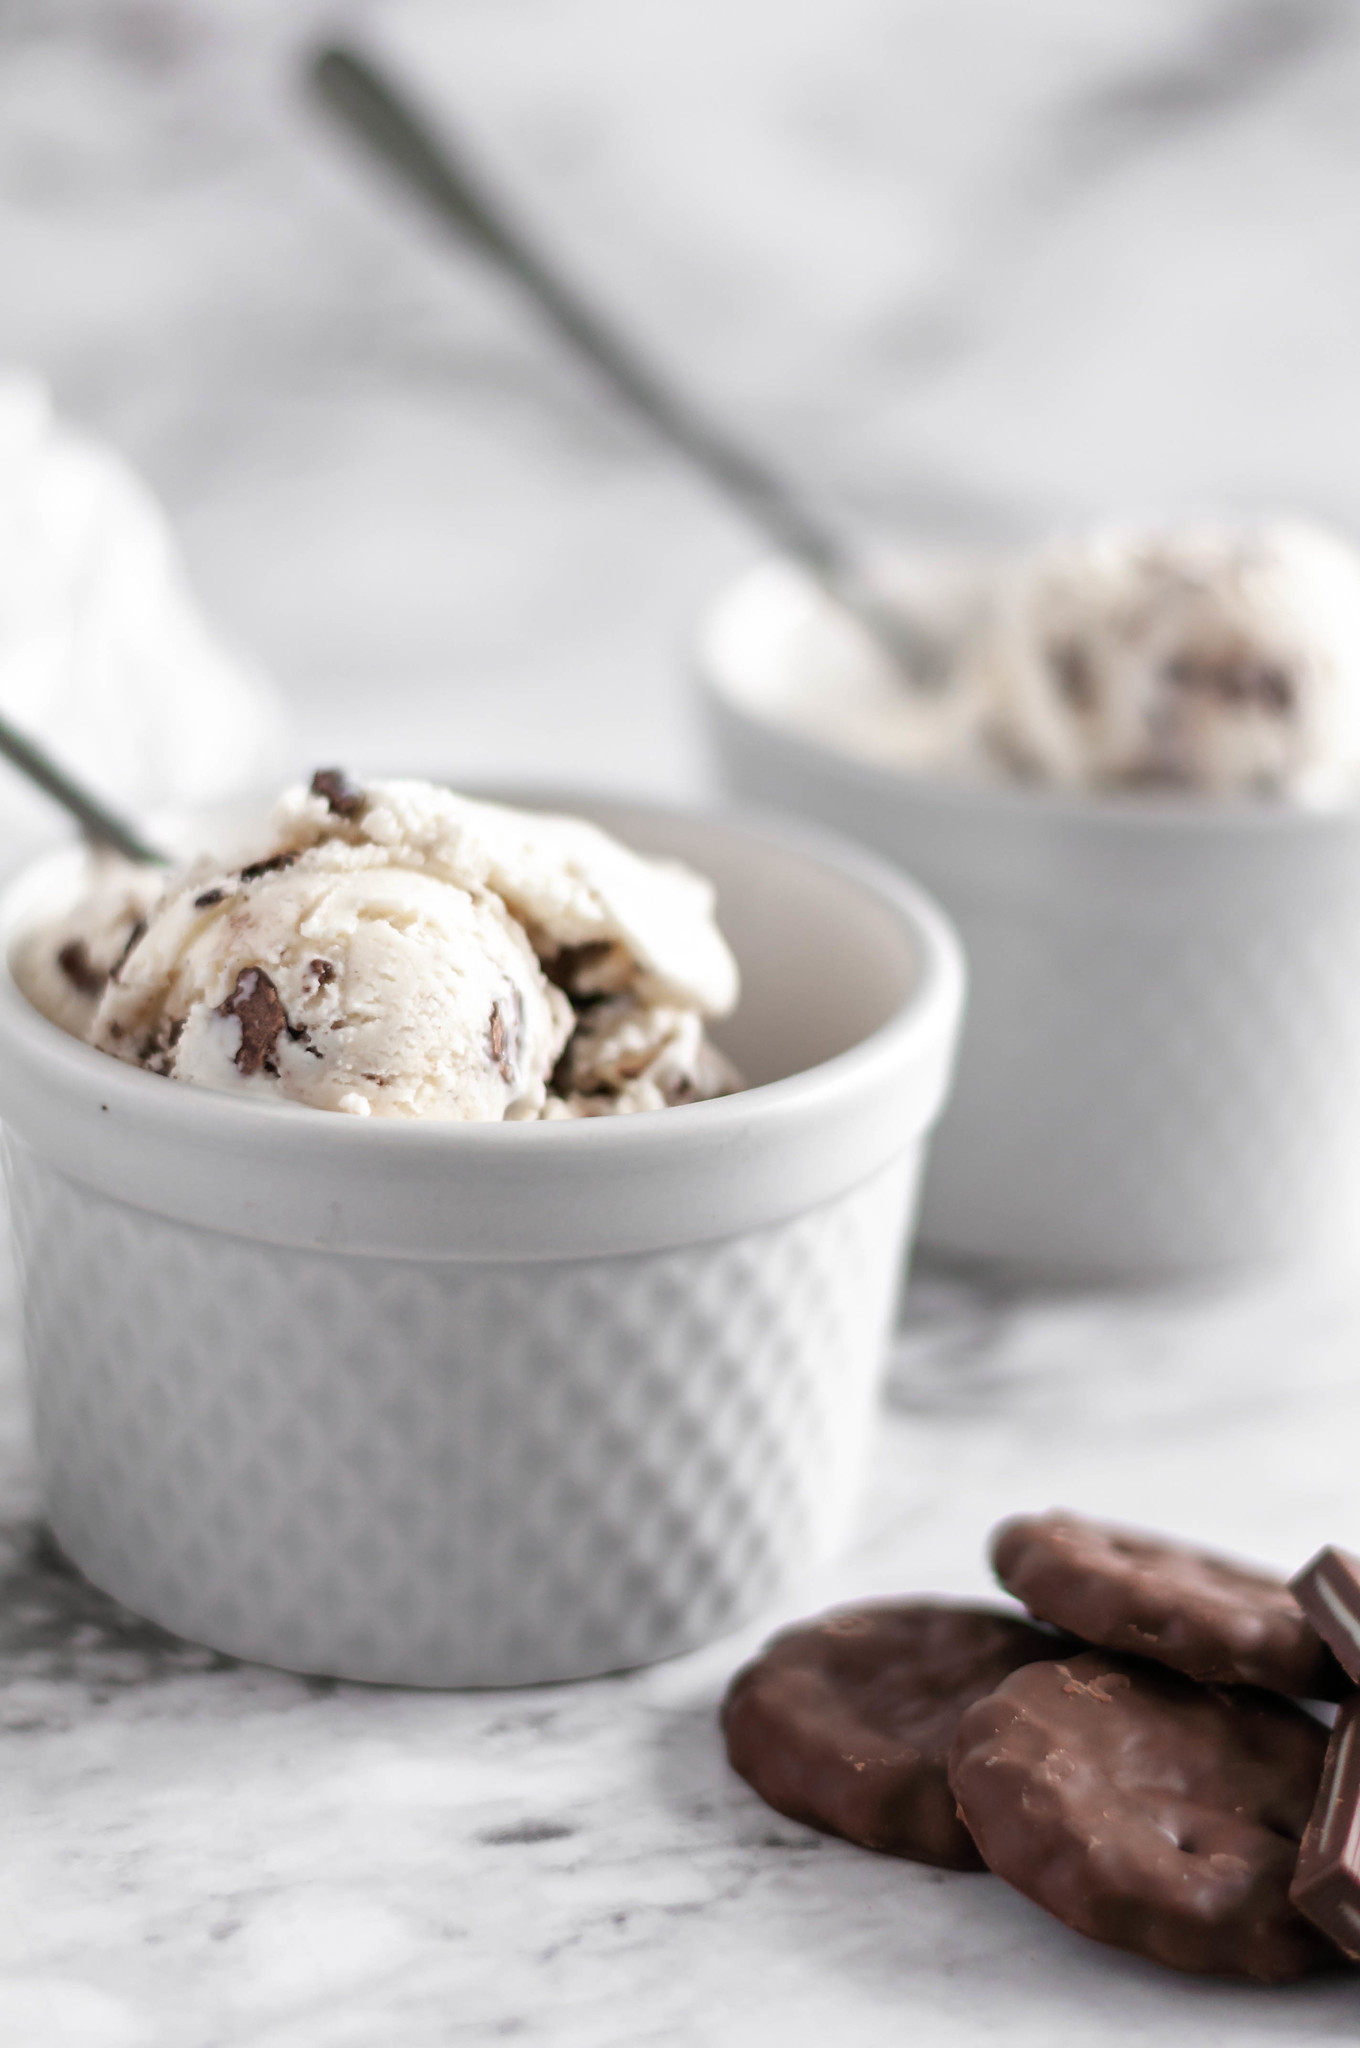 For an epic holiday dessert, break out the ice cream maker and whip up this Triple Mint Ice Cream. Creamy vanilla ice cream with three mint mix ins, grasshopper cookies, Andes mint candies and York Peppermint Patties.